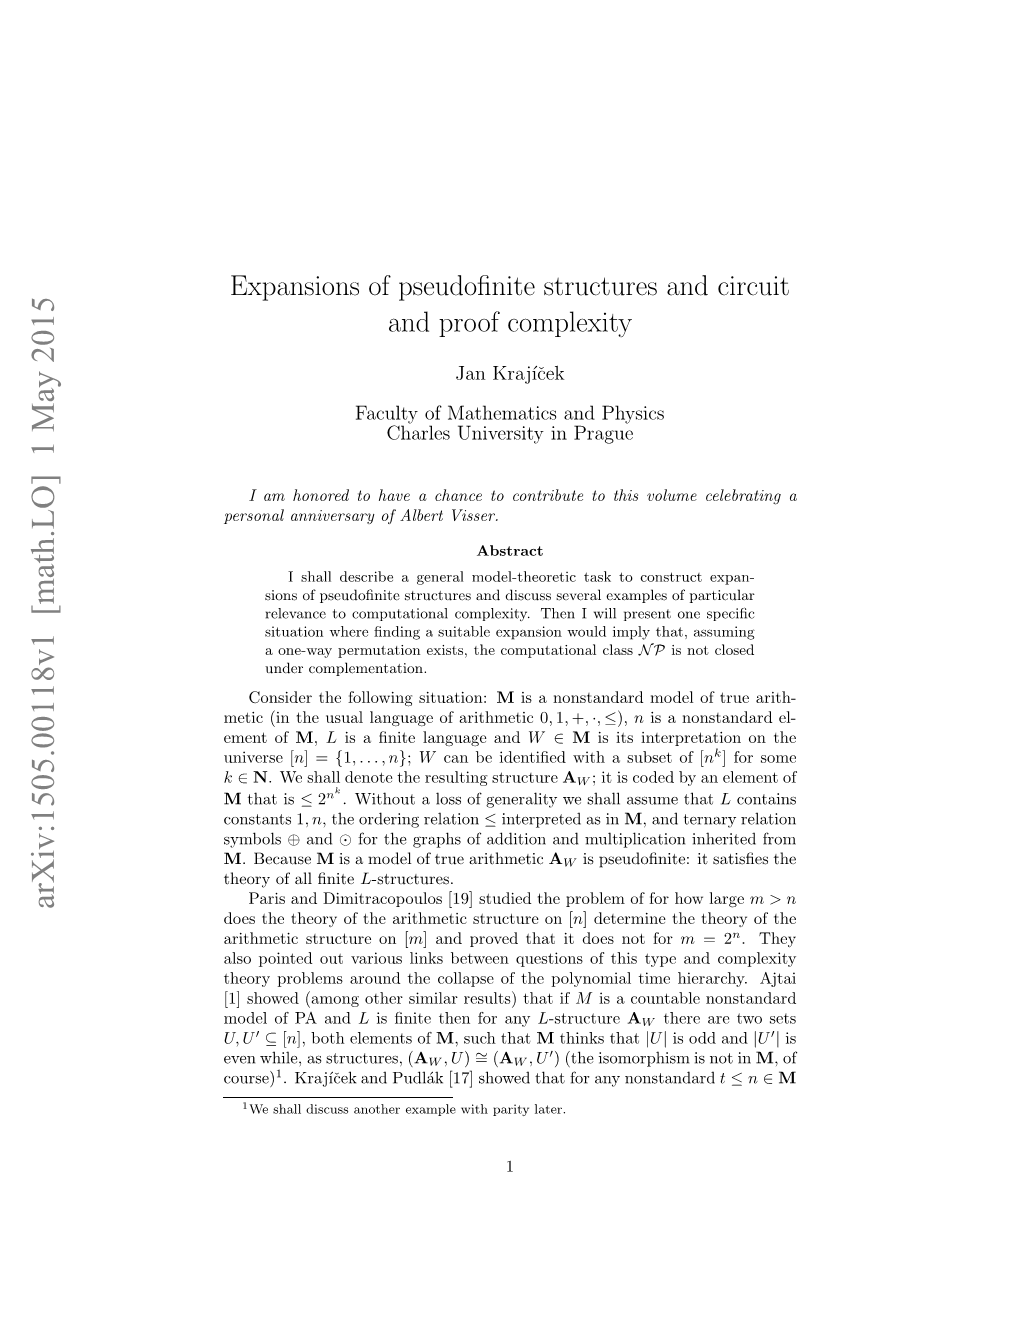 Expansions of Pseudofinite Structures and Circuit and Proof Complexity